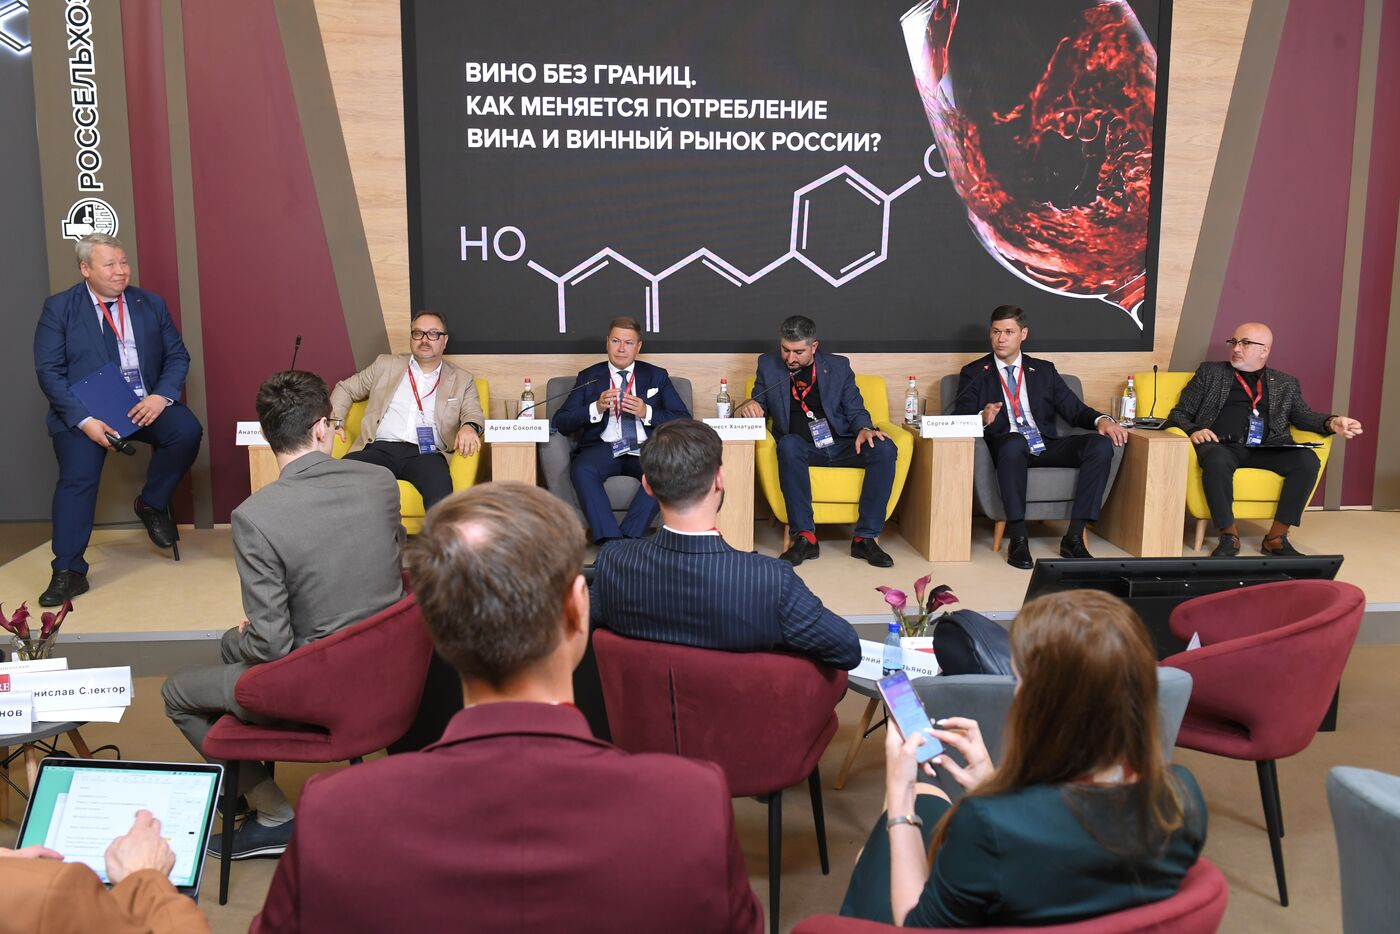 SPIEF-2023. Wine Without Borders. How is Wine Consumption and the Russian Wine Market Changing?